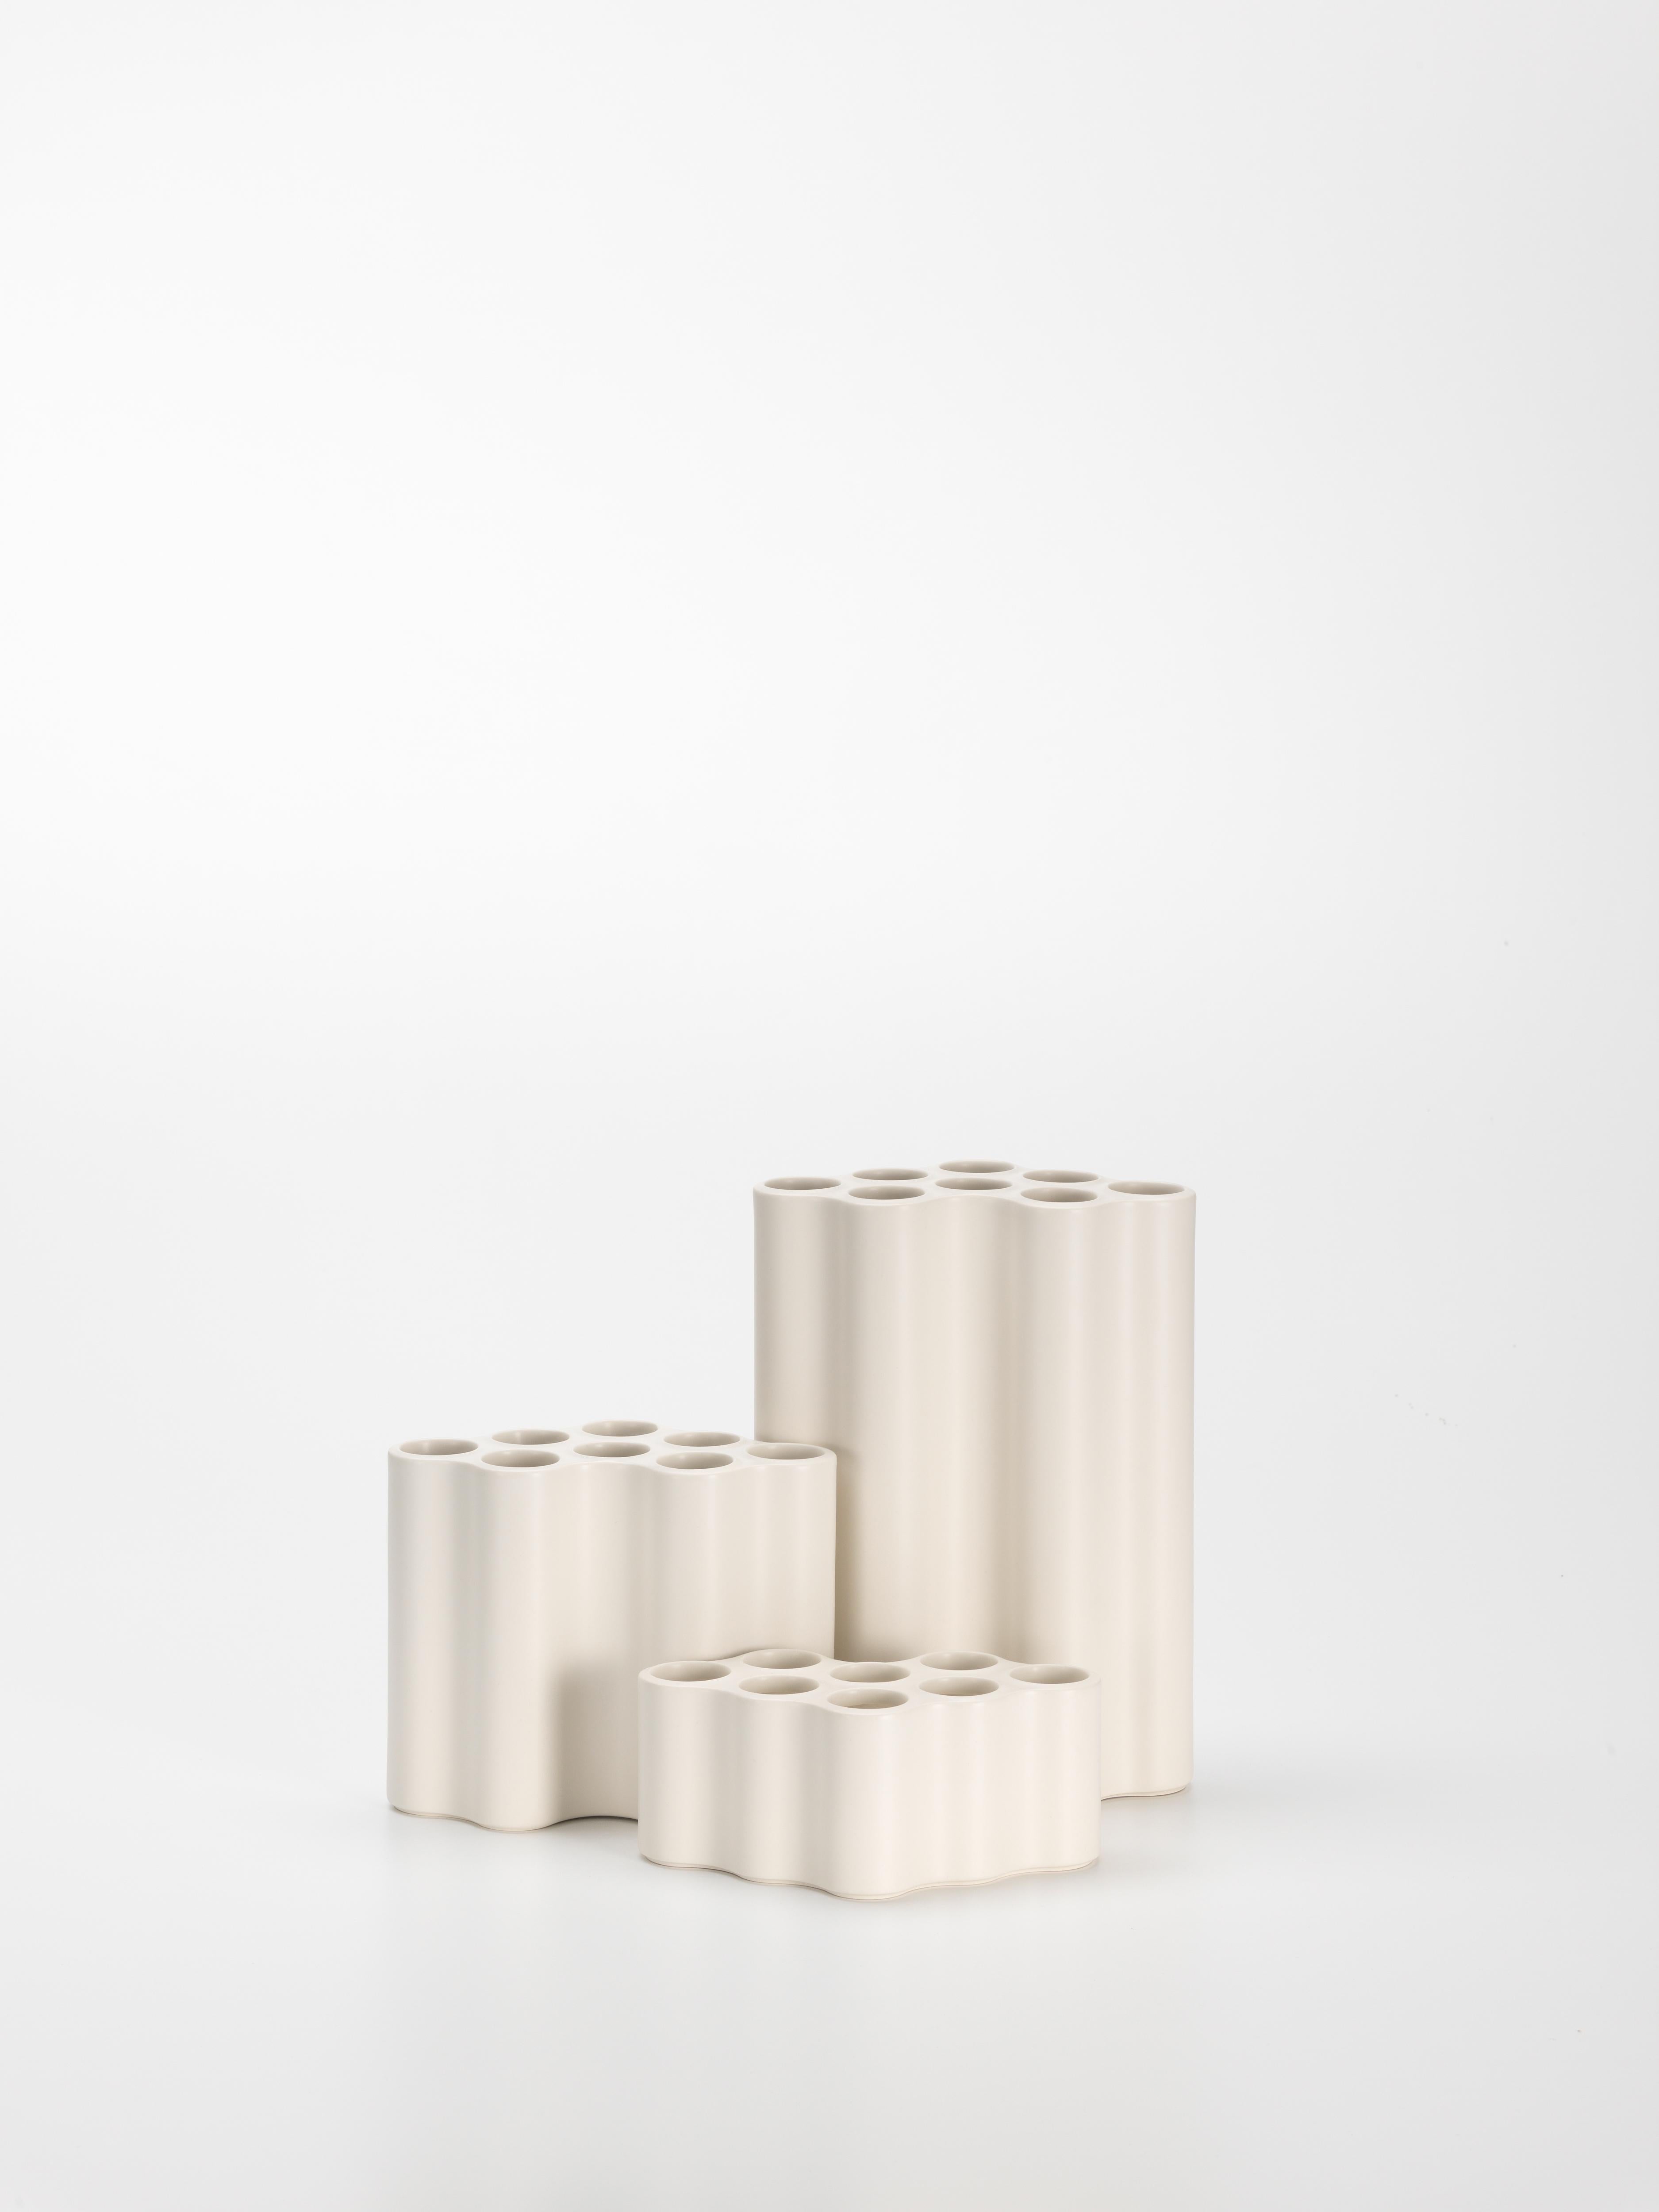 These products are only available in the United States.

The Nuage vases in ceramic are elaborately handcrafted, resulting in scarcely discernible differences that make each charming vase a unique object. The undulating surfaces produce an